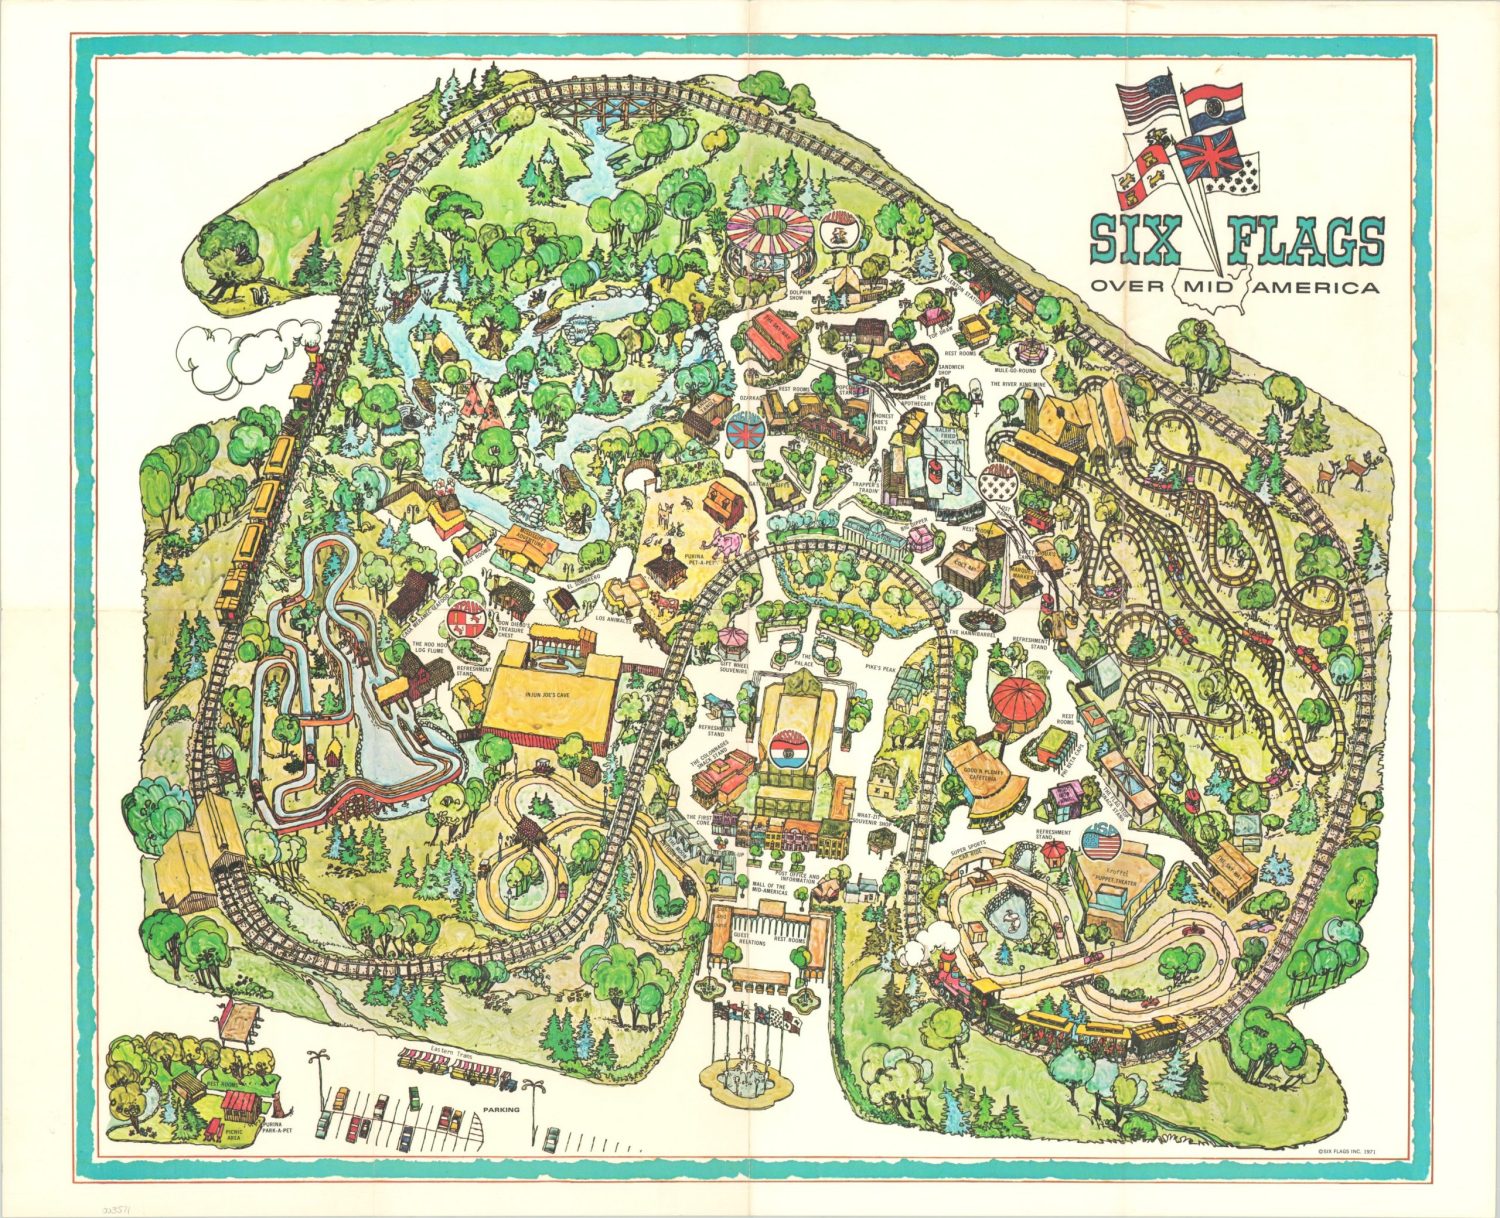 SIX FLAGS OVER MID-AMERICA